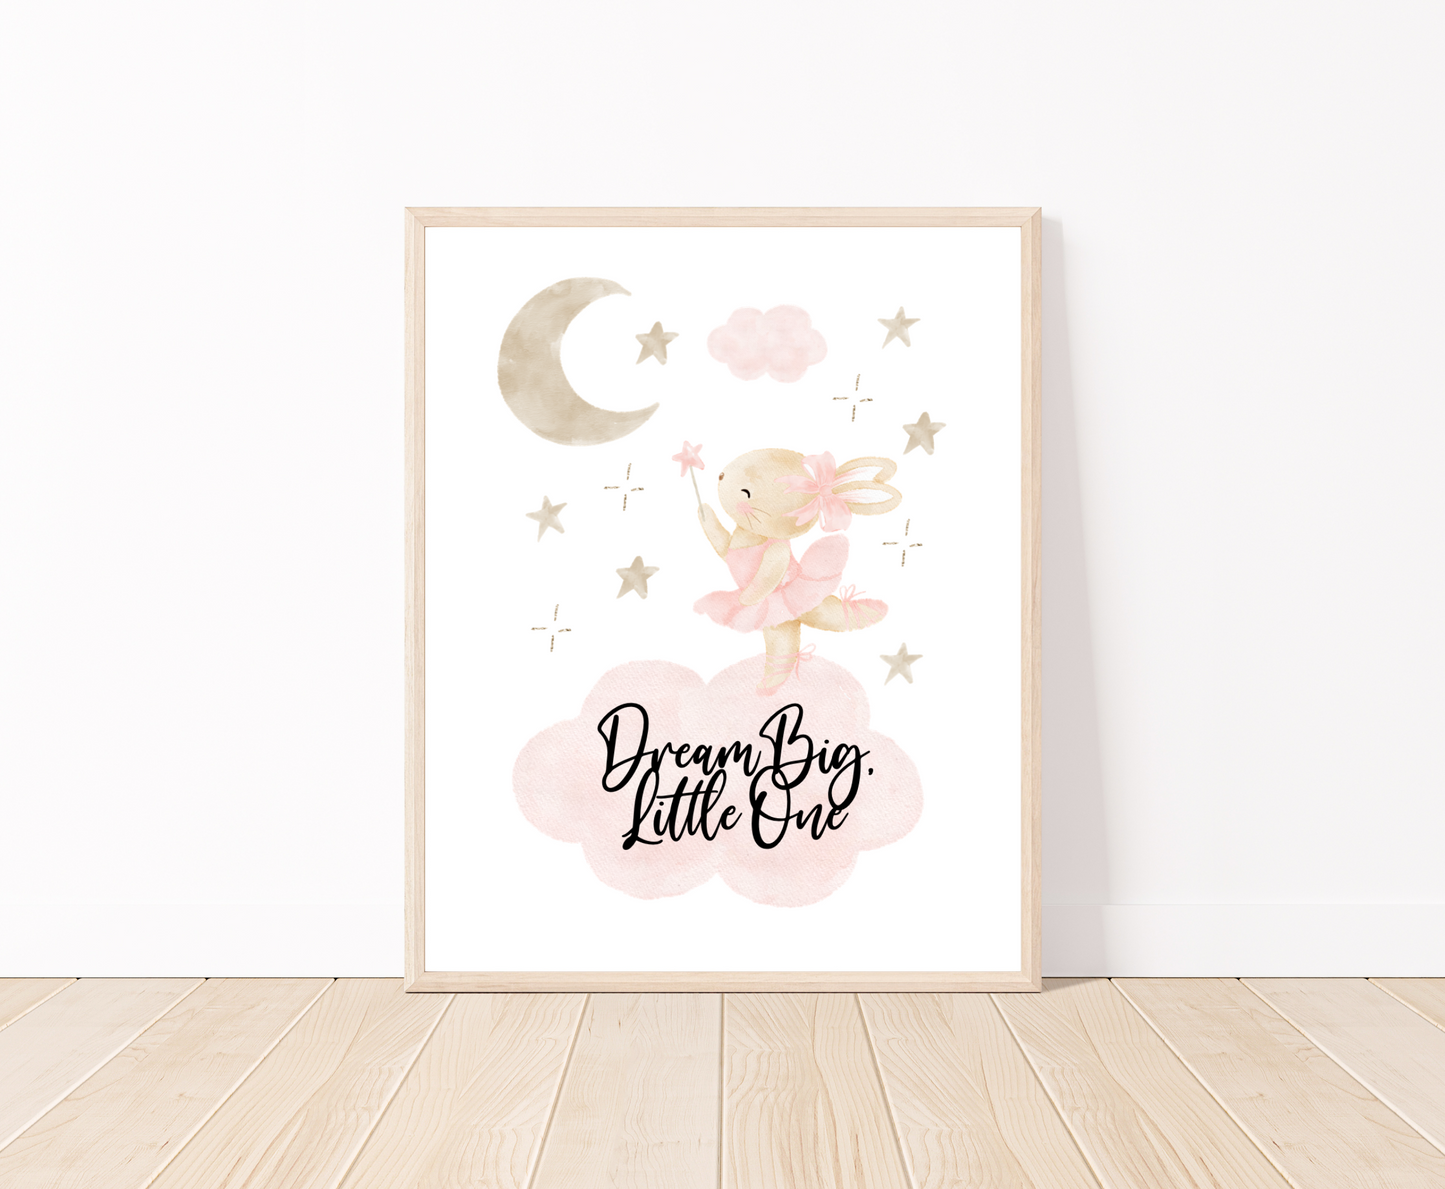 A little girl’s room graphic placed on a white wall and parquet flooring. It shows a grey-pinkish crescent with a brown teddy rabbit wearing a pink bow, with a few tiny grey-pinkish stars beside it and two pinkish clouds. It also includes a piece of writing that says “Dream Big Little One”.